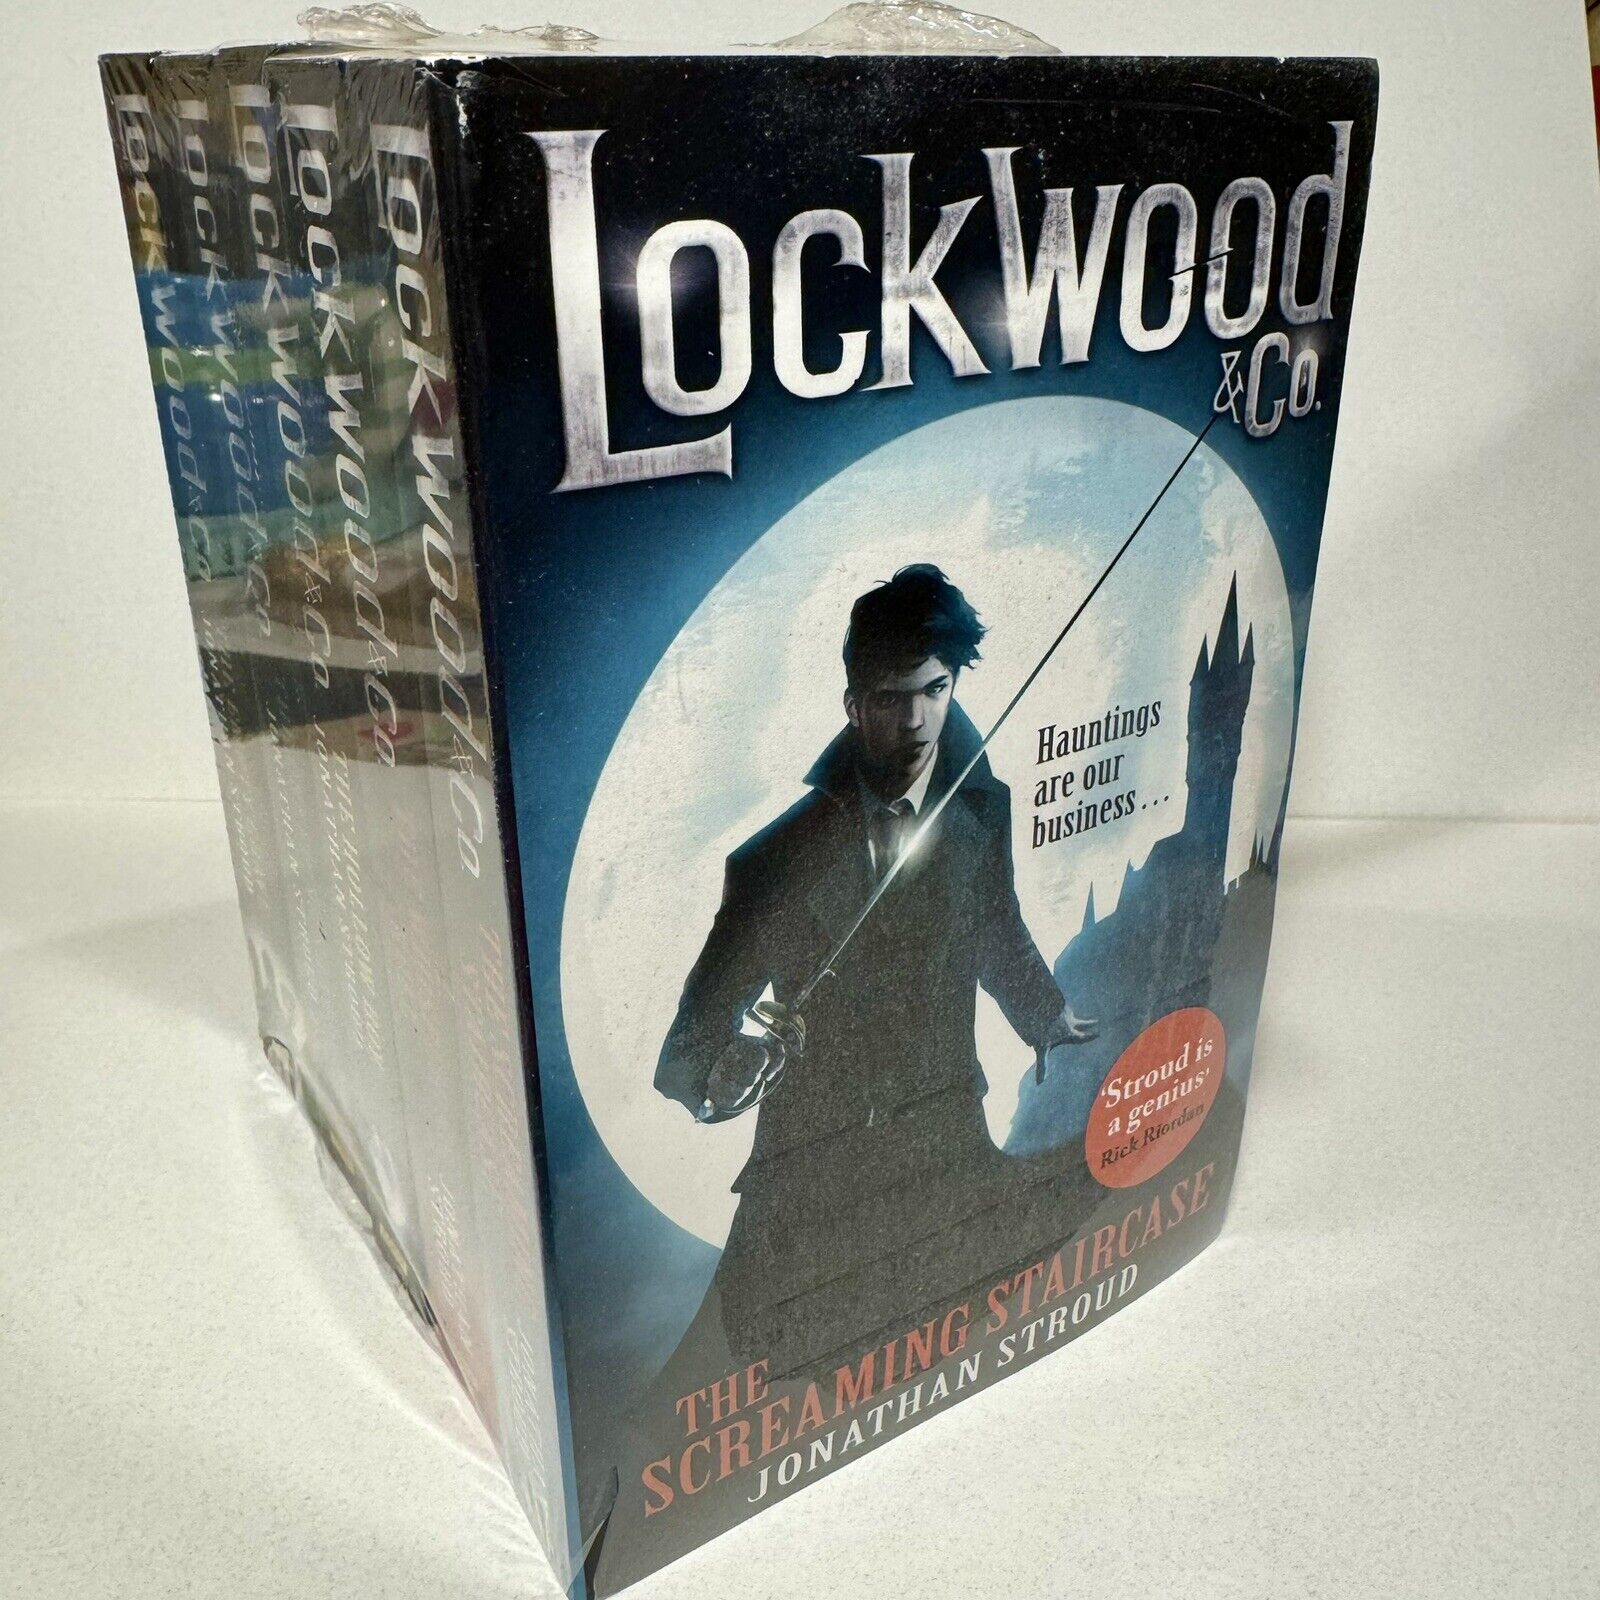 Lockwood and Co Series 5 Books Collection Set by Jonathan Children’s Brand New